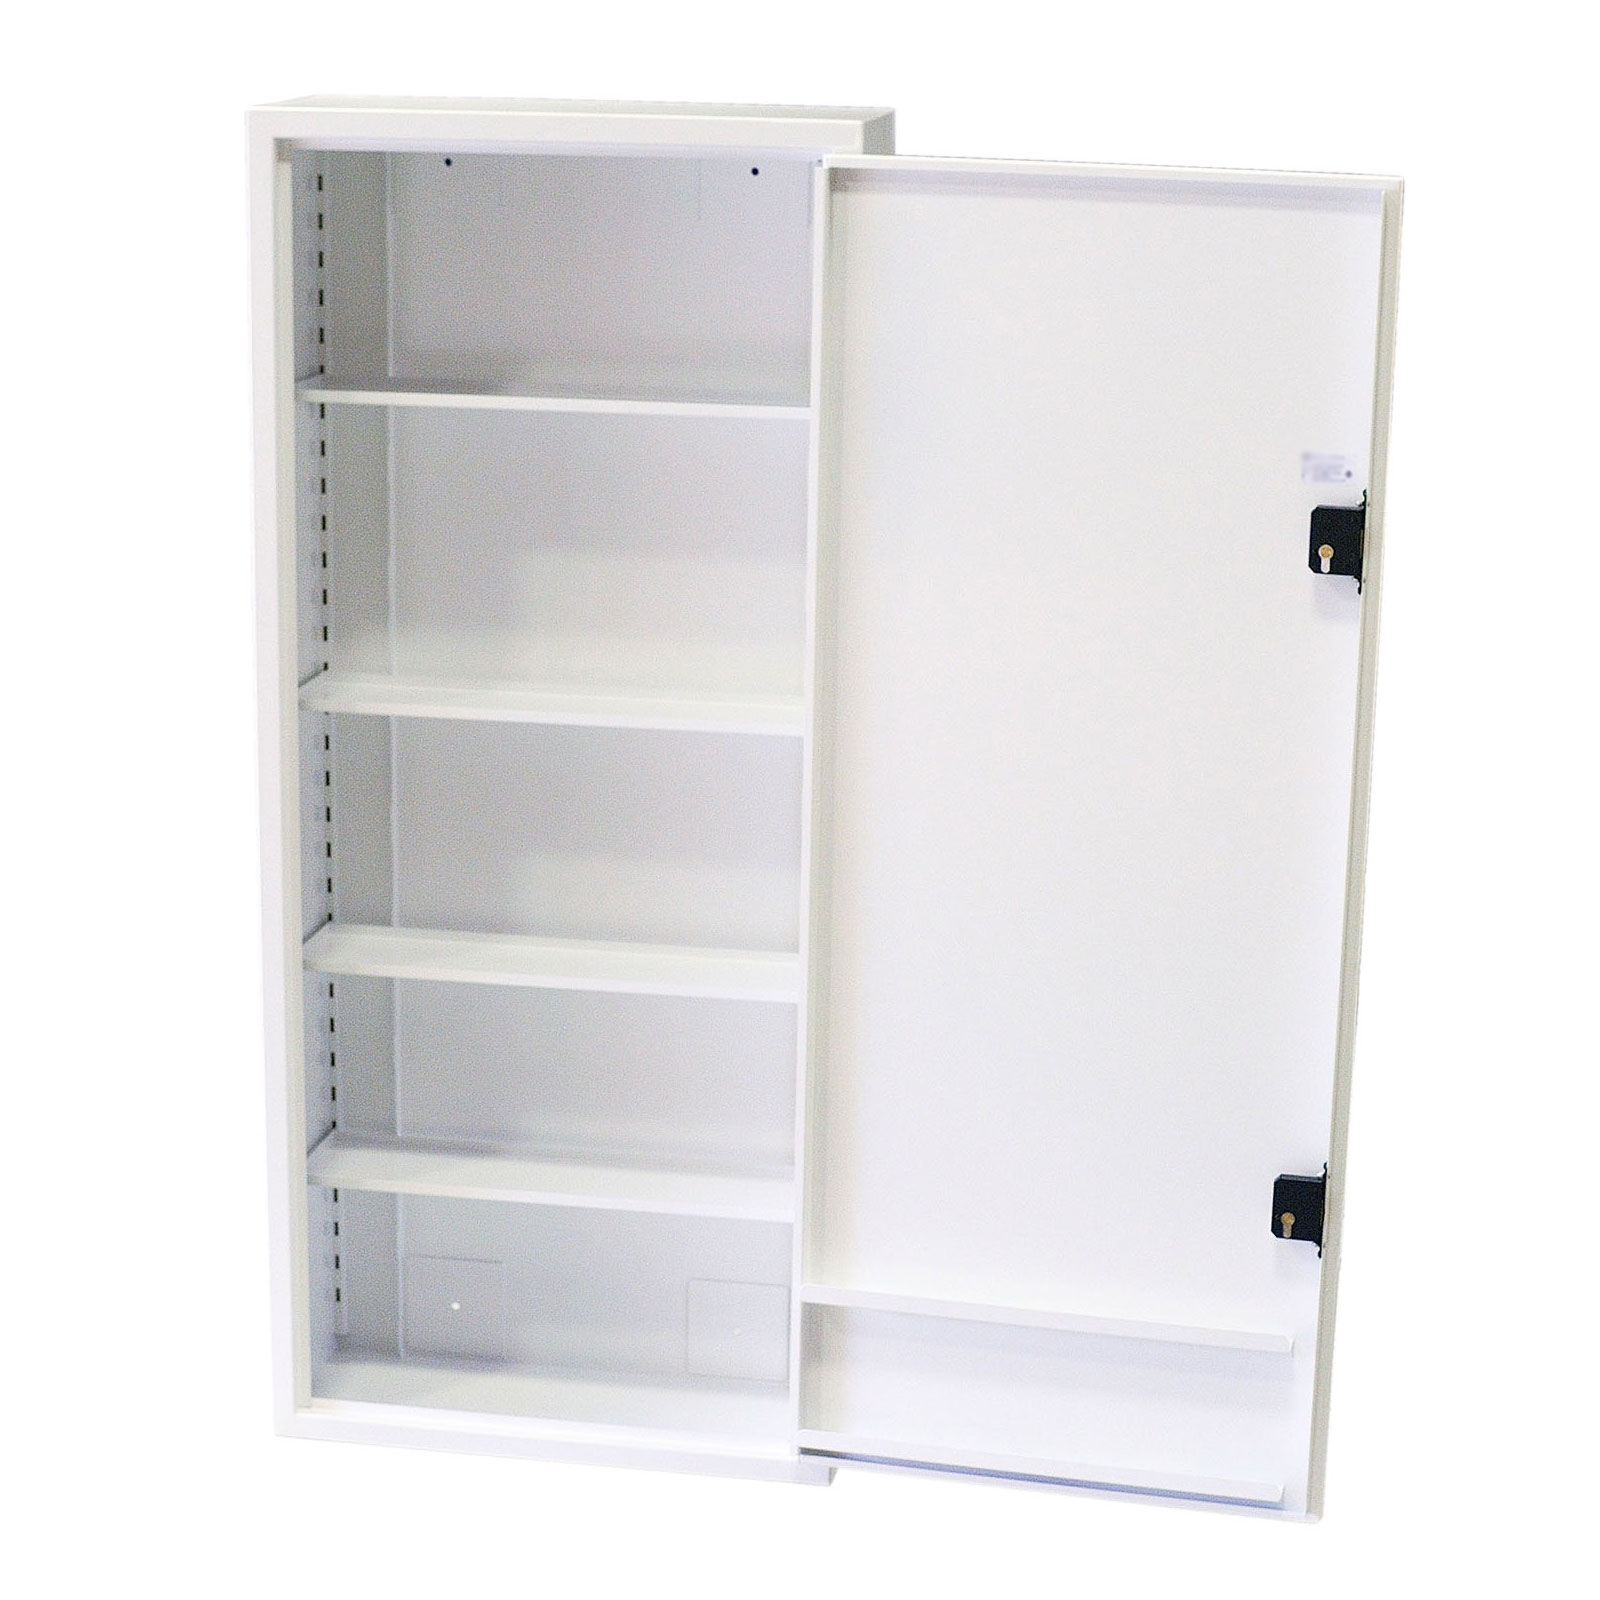 FPD 11293 controlled drug cupboard with open door